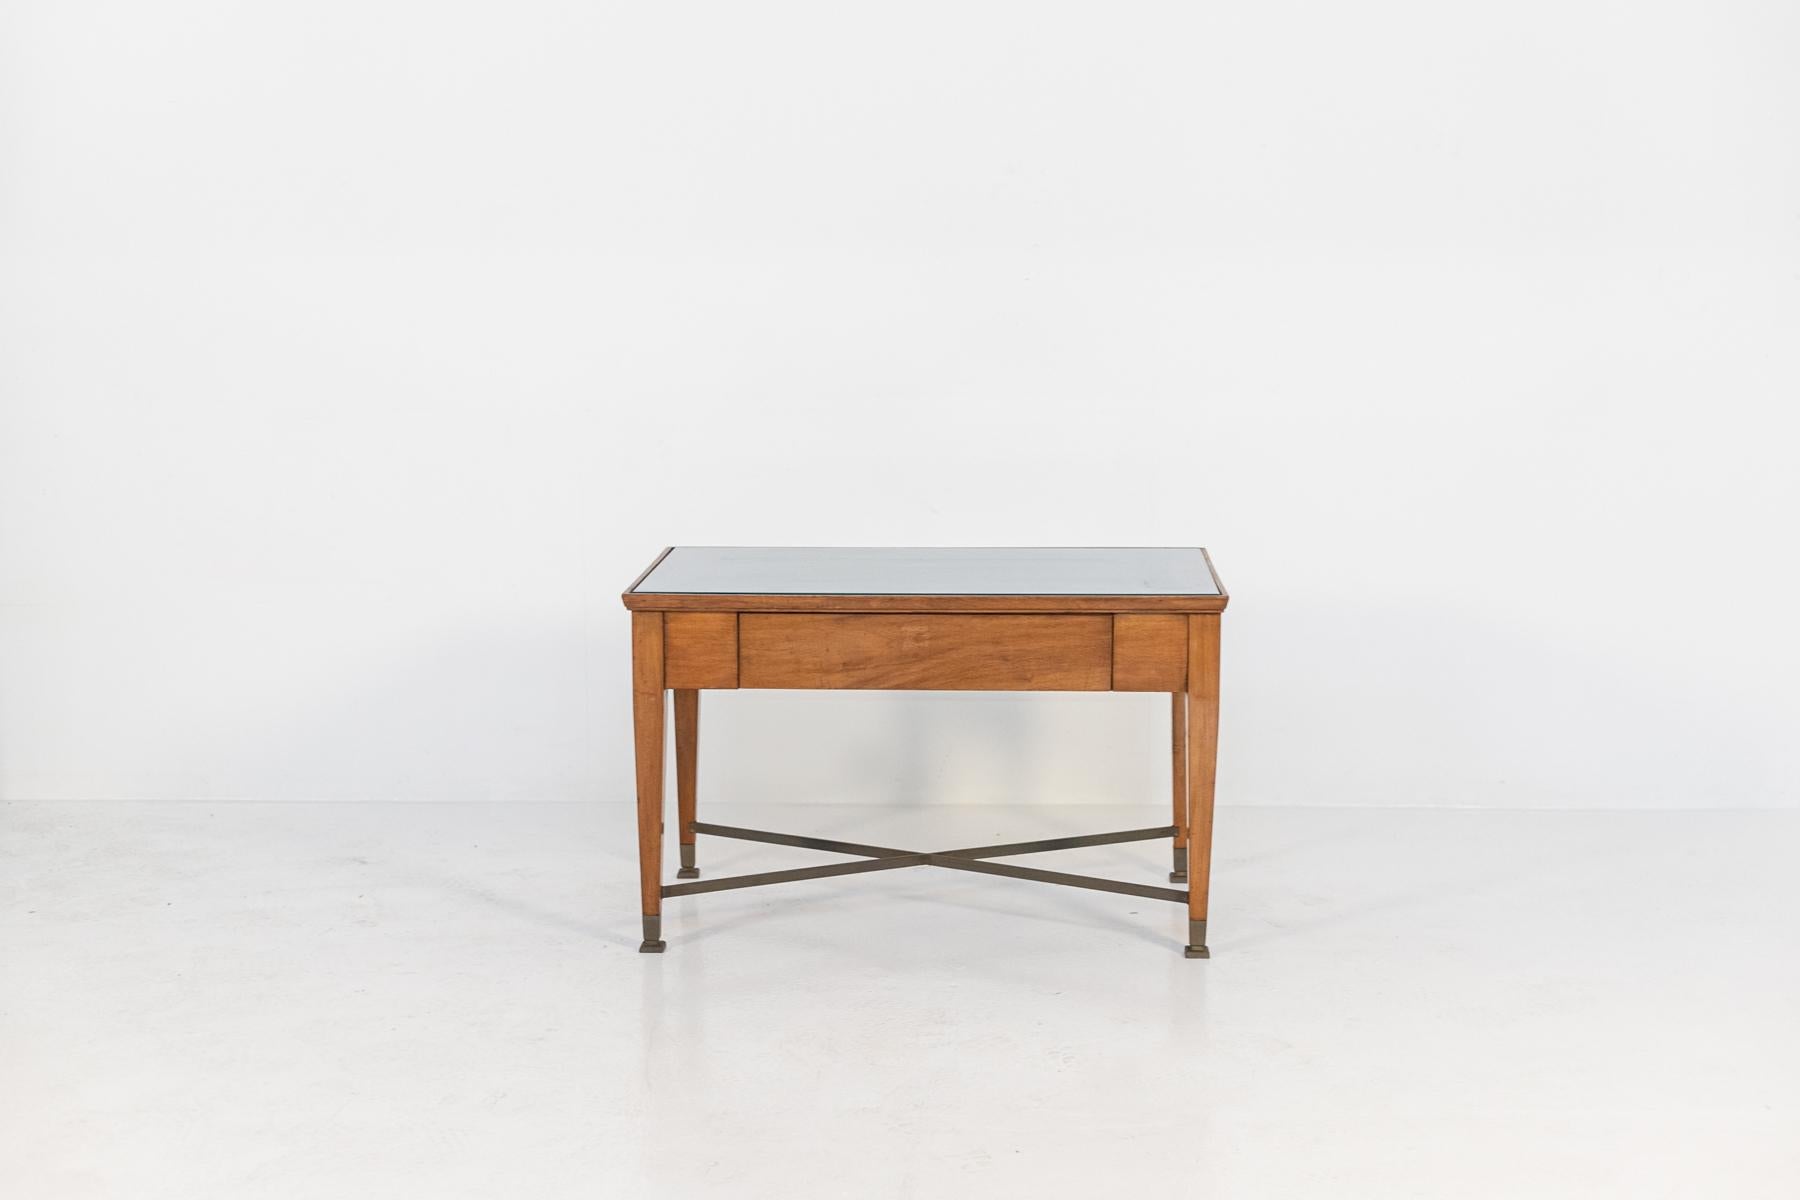 Low Italian wooden coffee table attributed to Gio Ponti from the 1960s. The coffee table has a wooden structure with rigorous and clean shapes. The four legs of the table are connected by central brass X-shaped bars. The feet have square brass